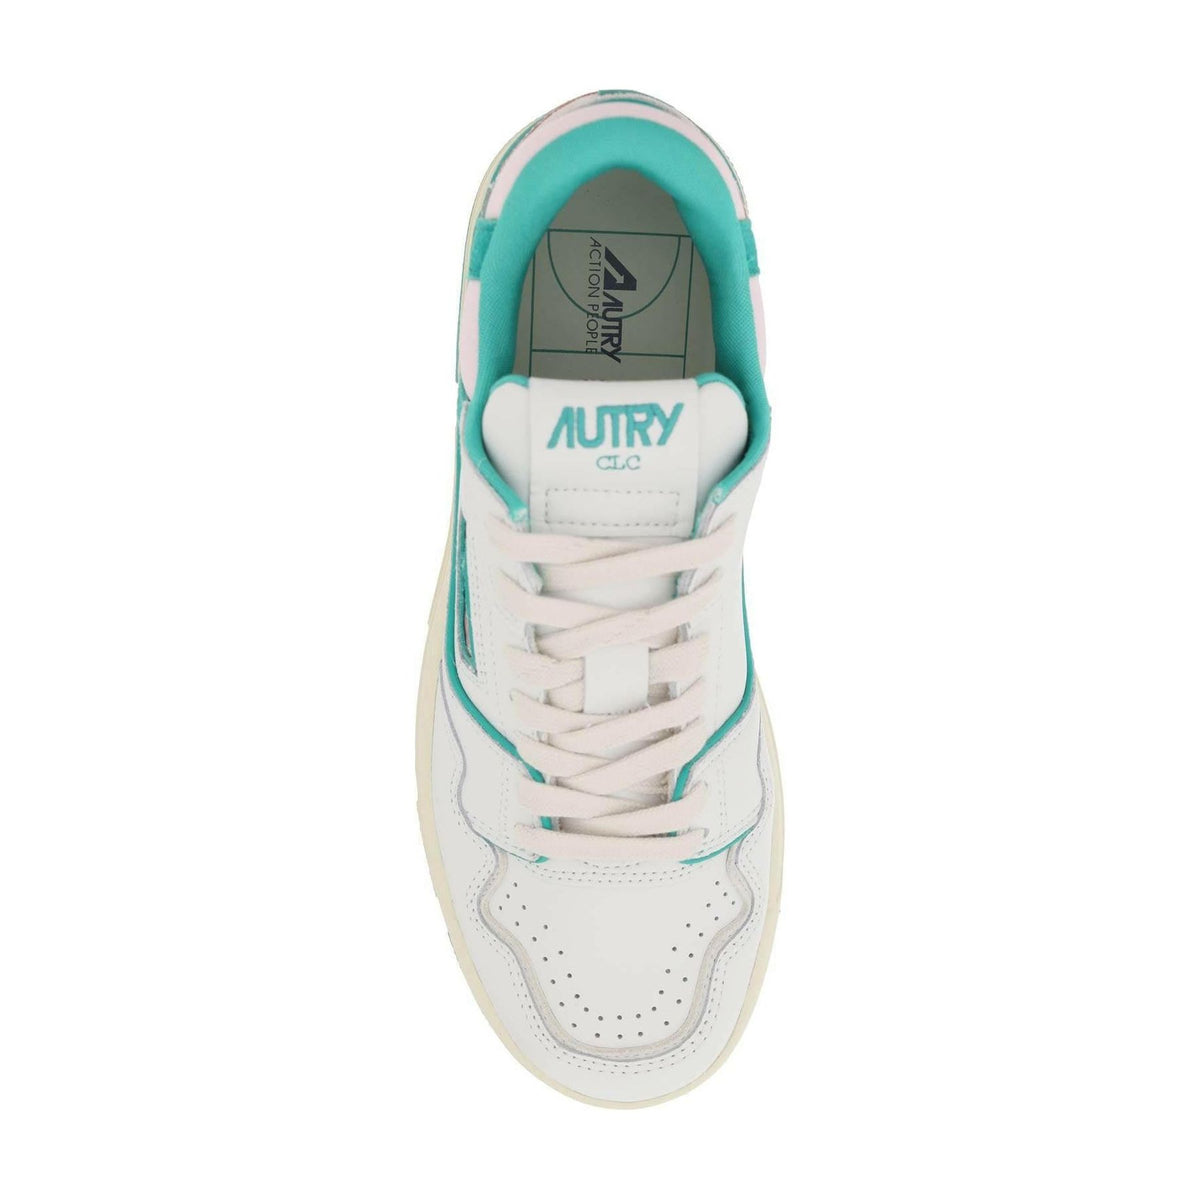 AUTRY - White and Emerald Green Leather CLC Sneakers - JOHN JULIA